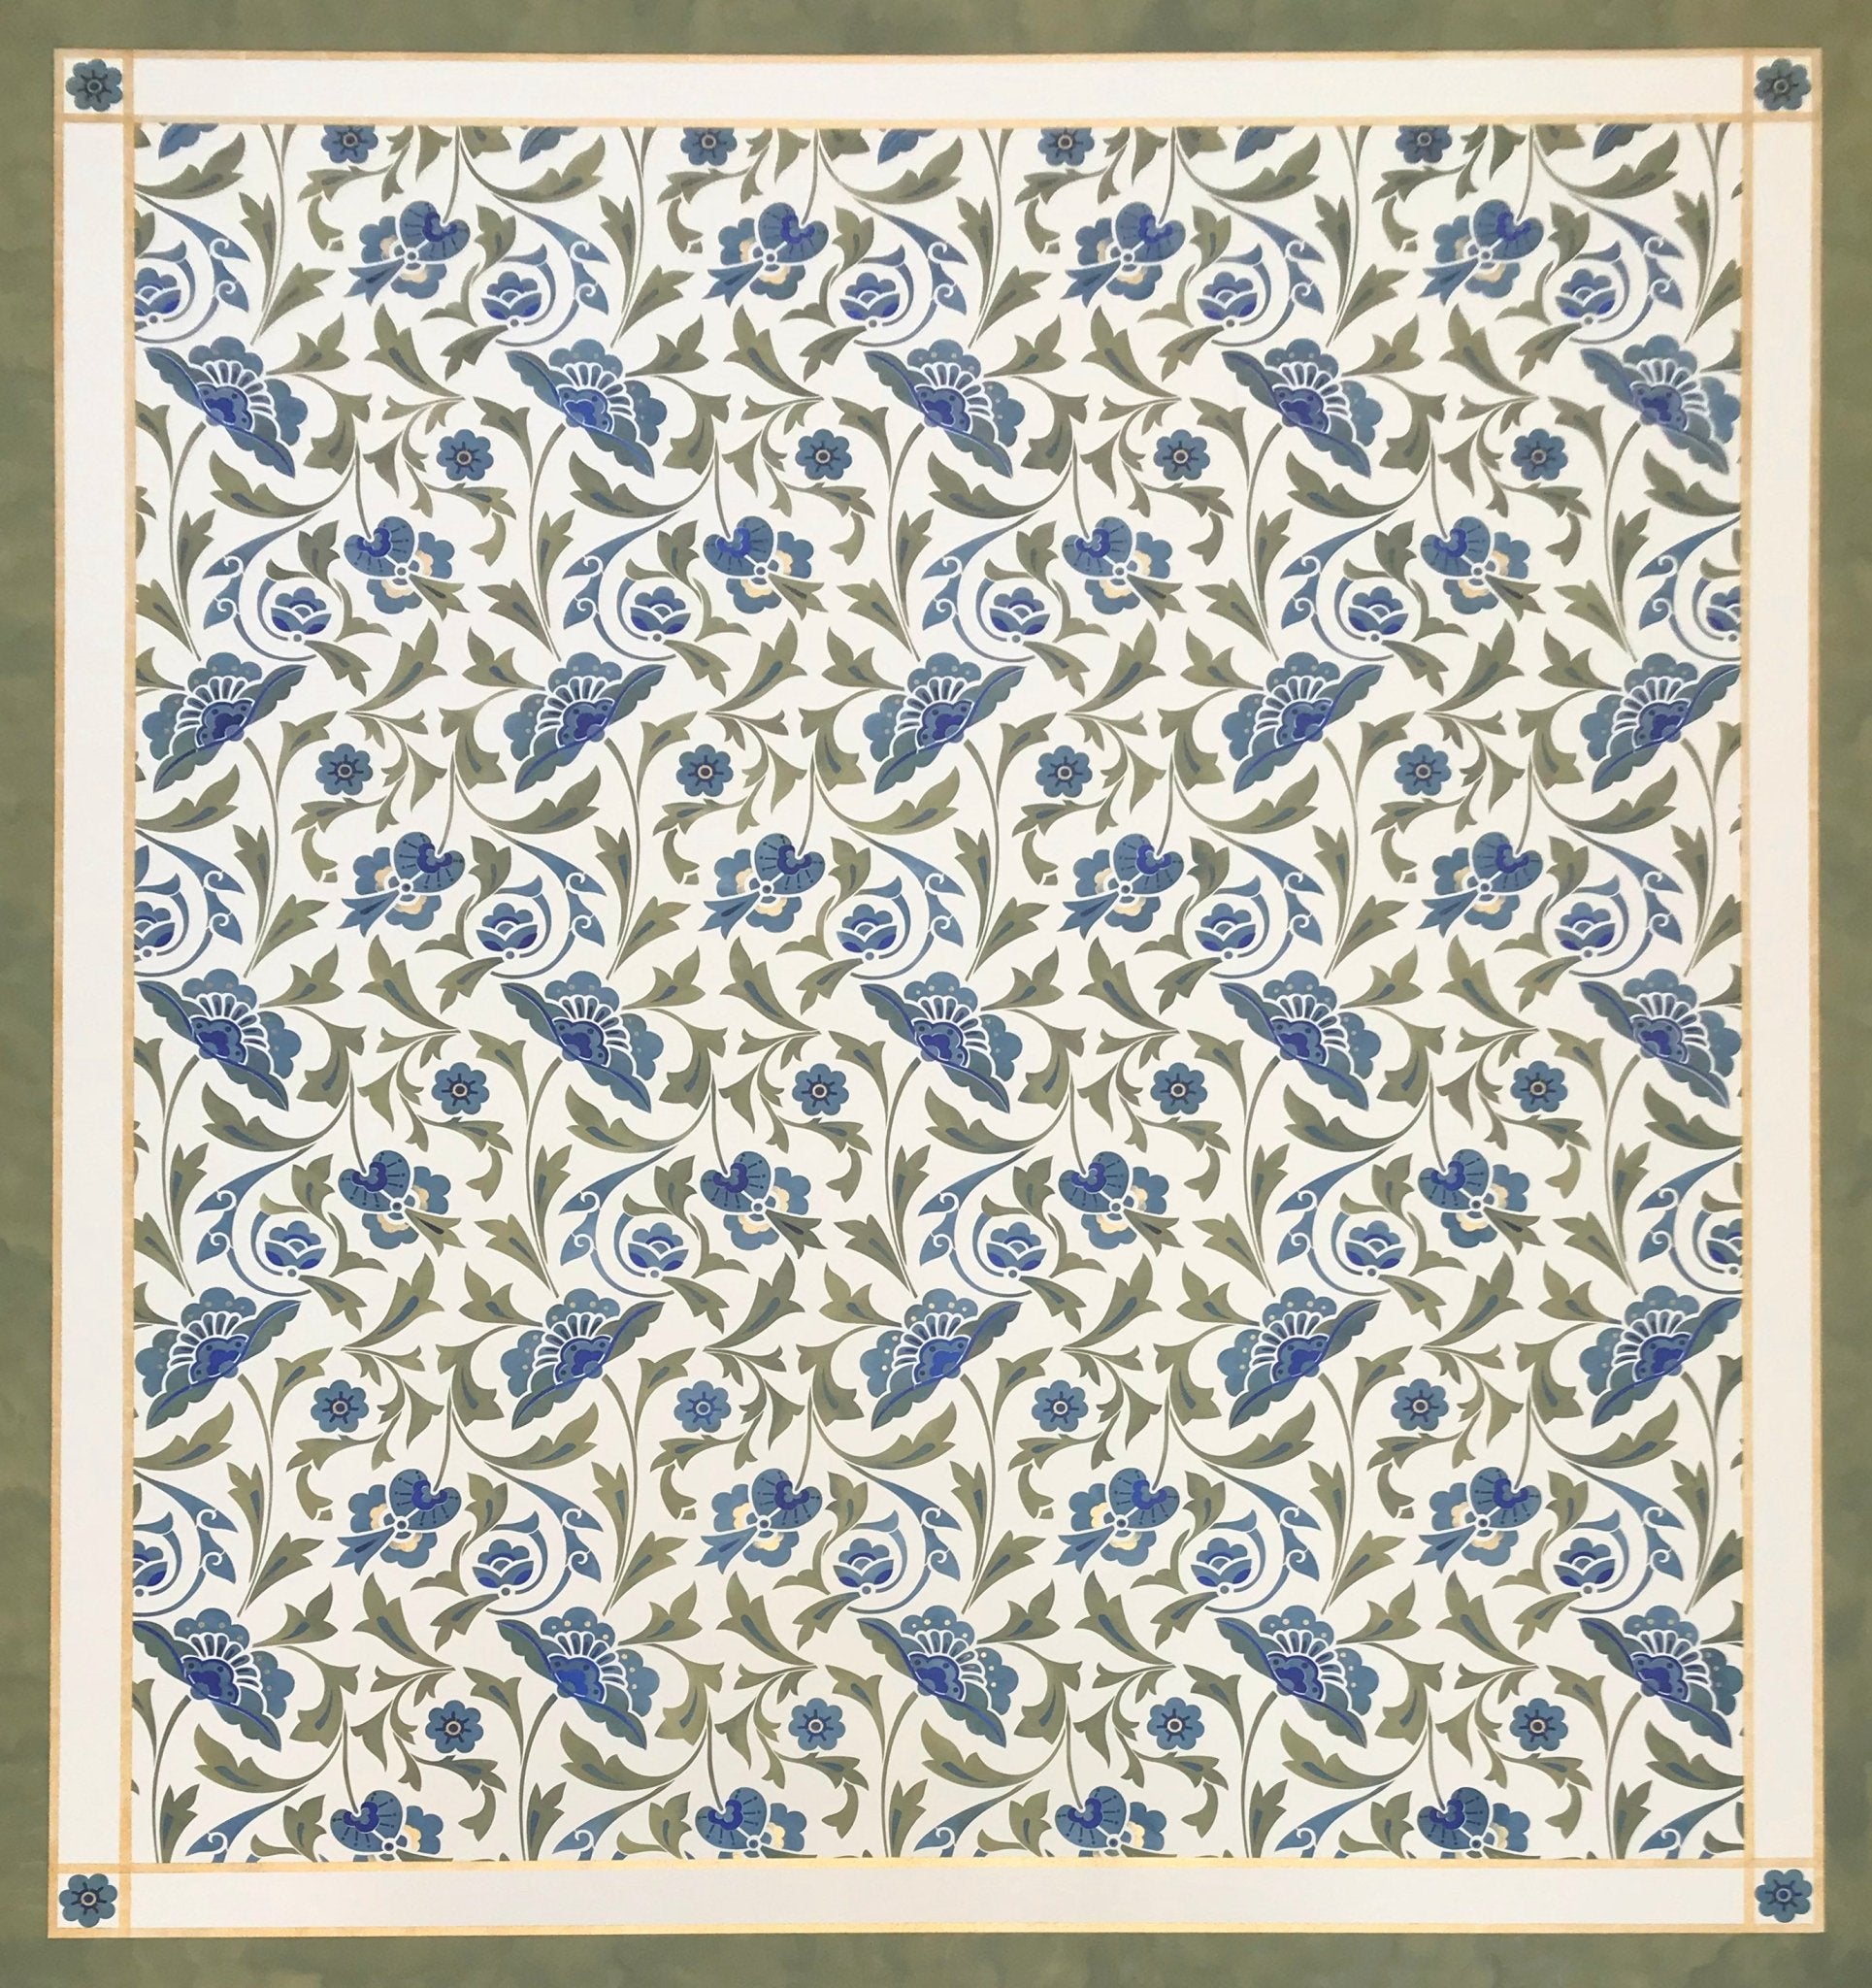 Full image of this floorcloth with an all over floral pattern based on a Christopher Dresser pattern.